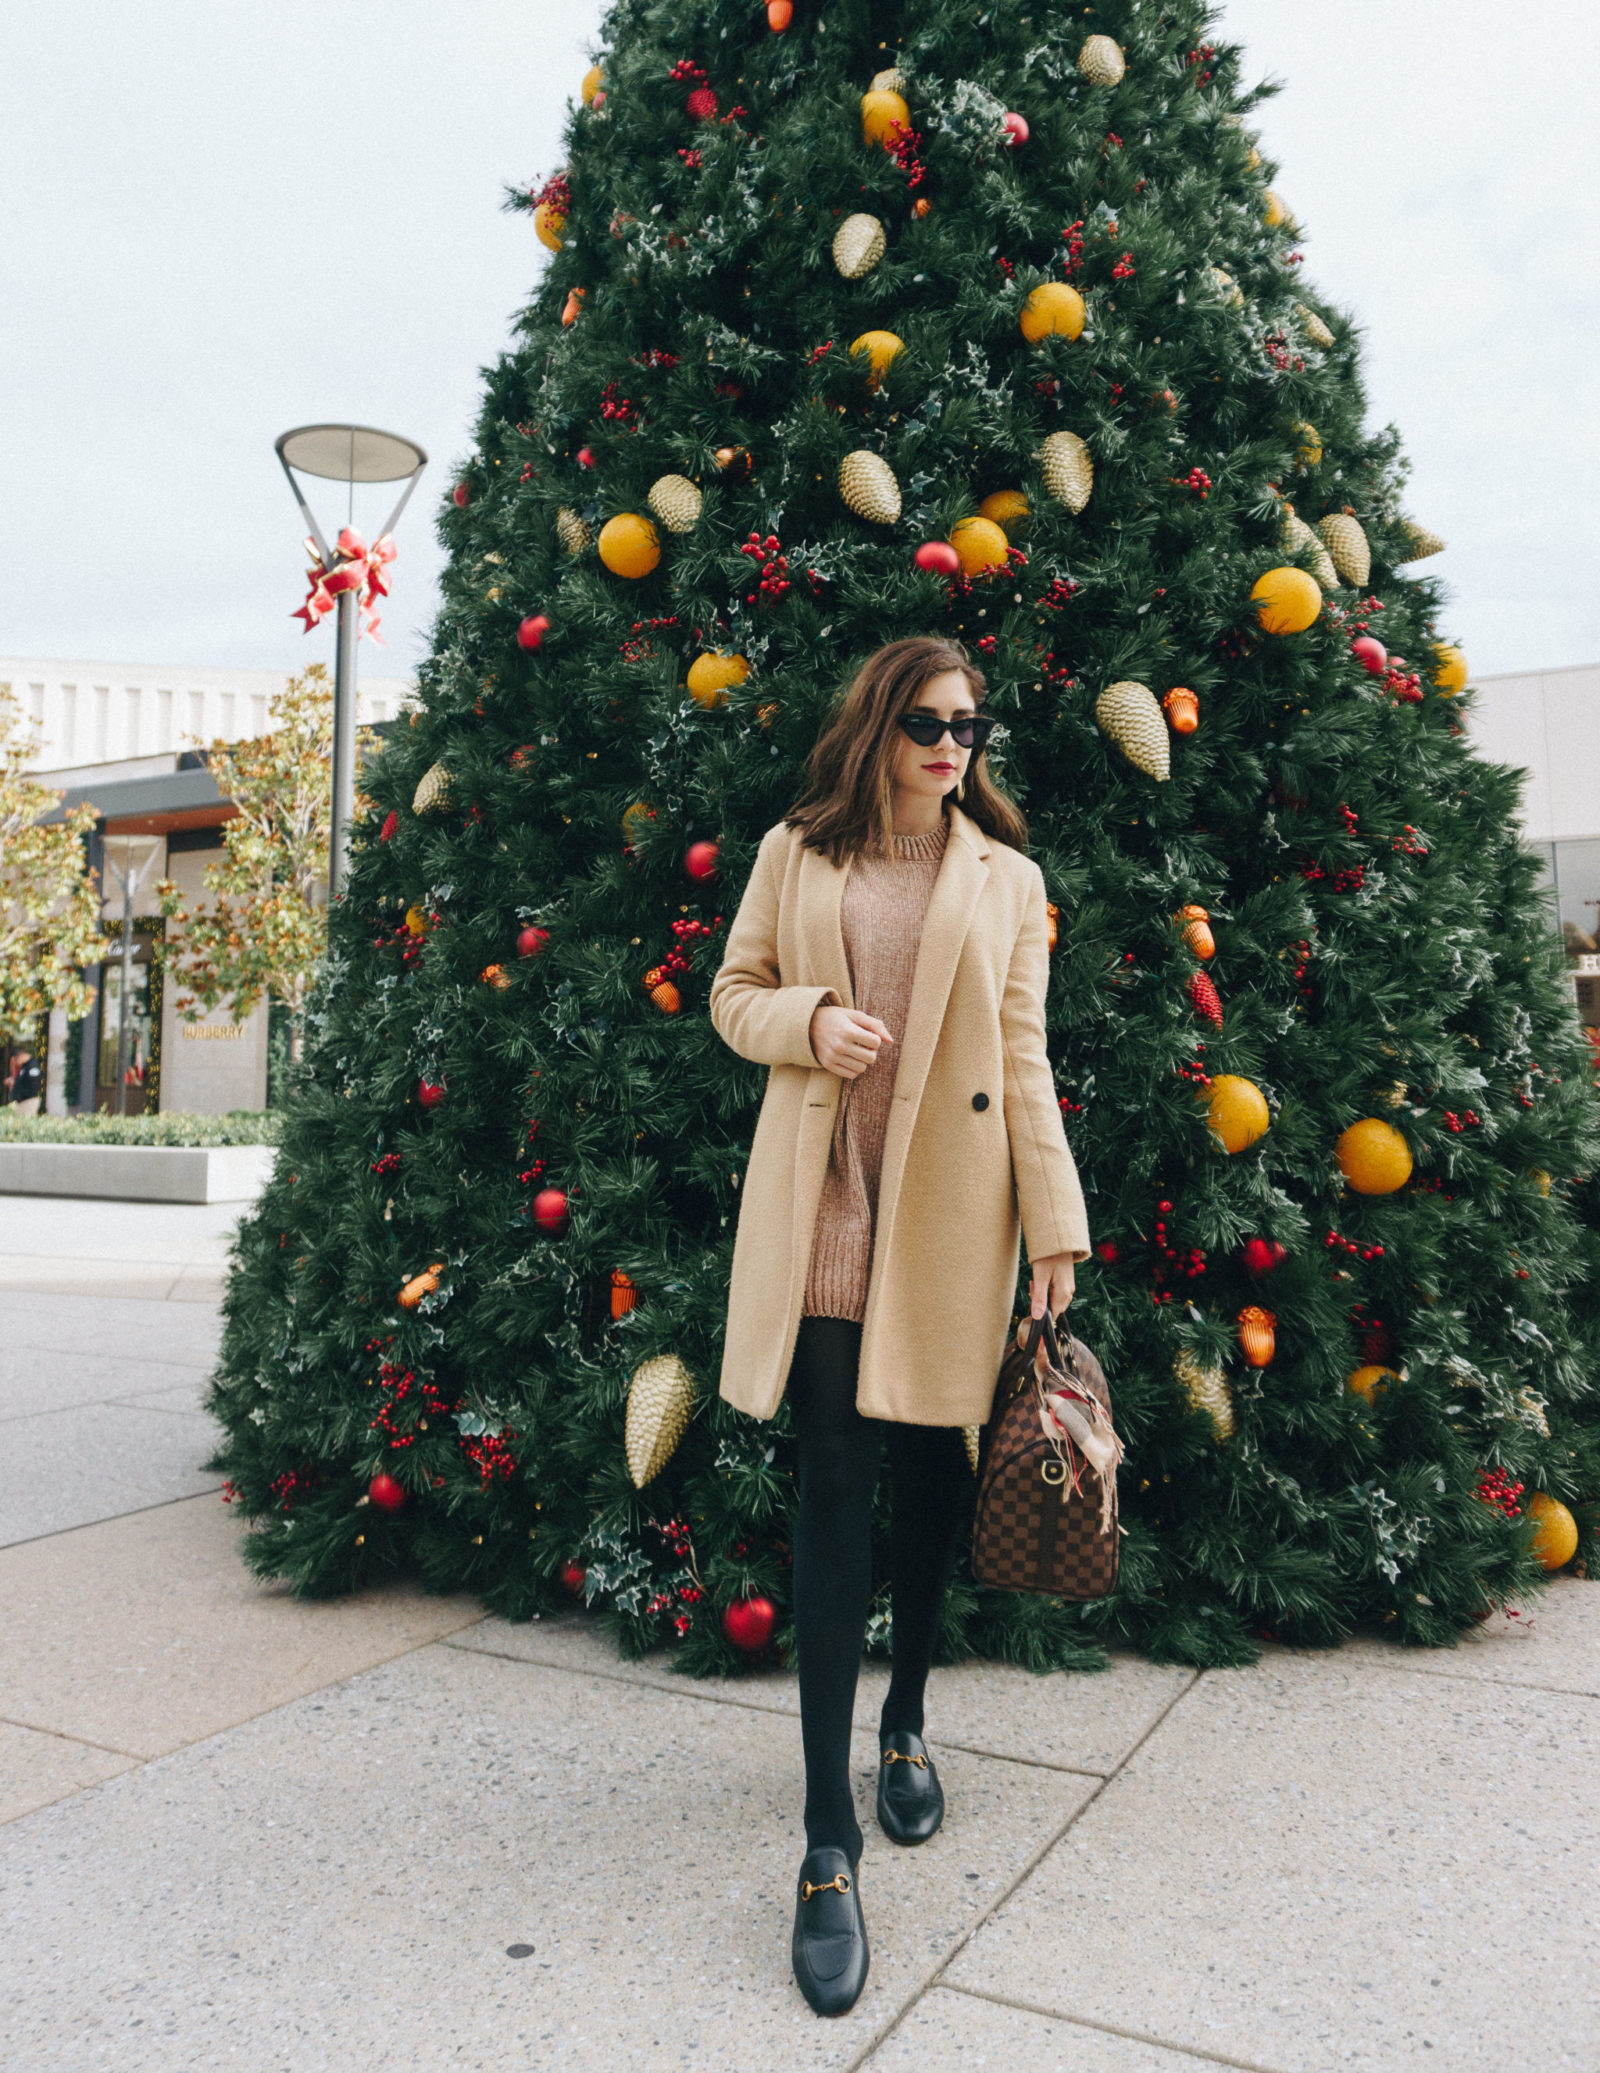 Winter Outfit Inspiration: 3 Tips for Styling a Camel Coat